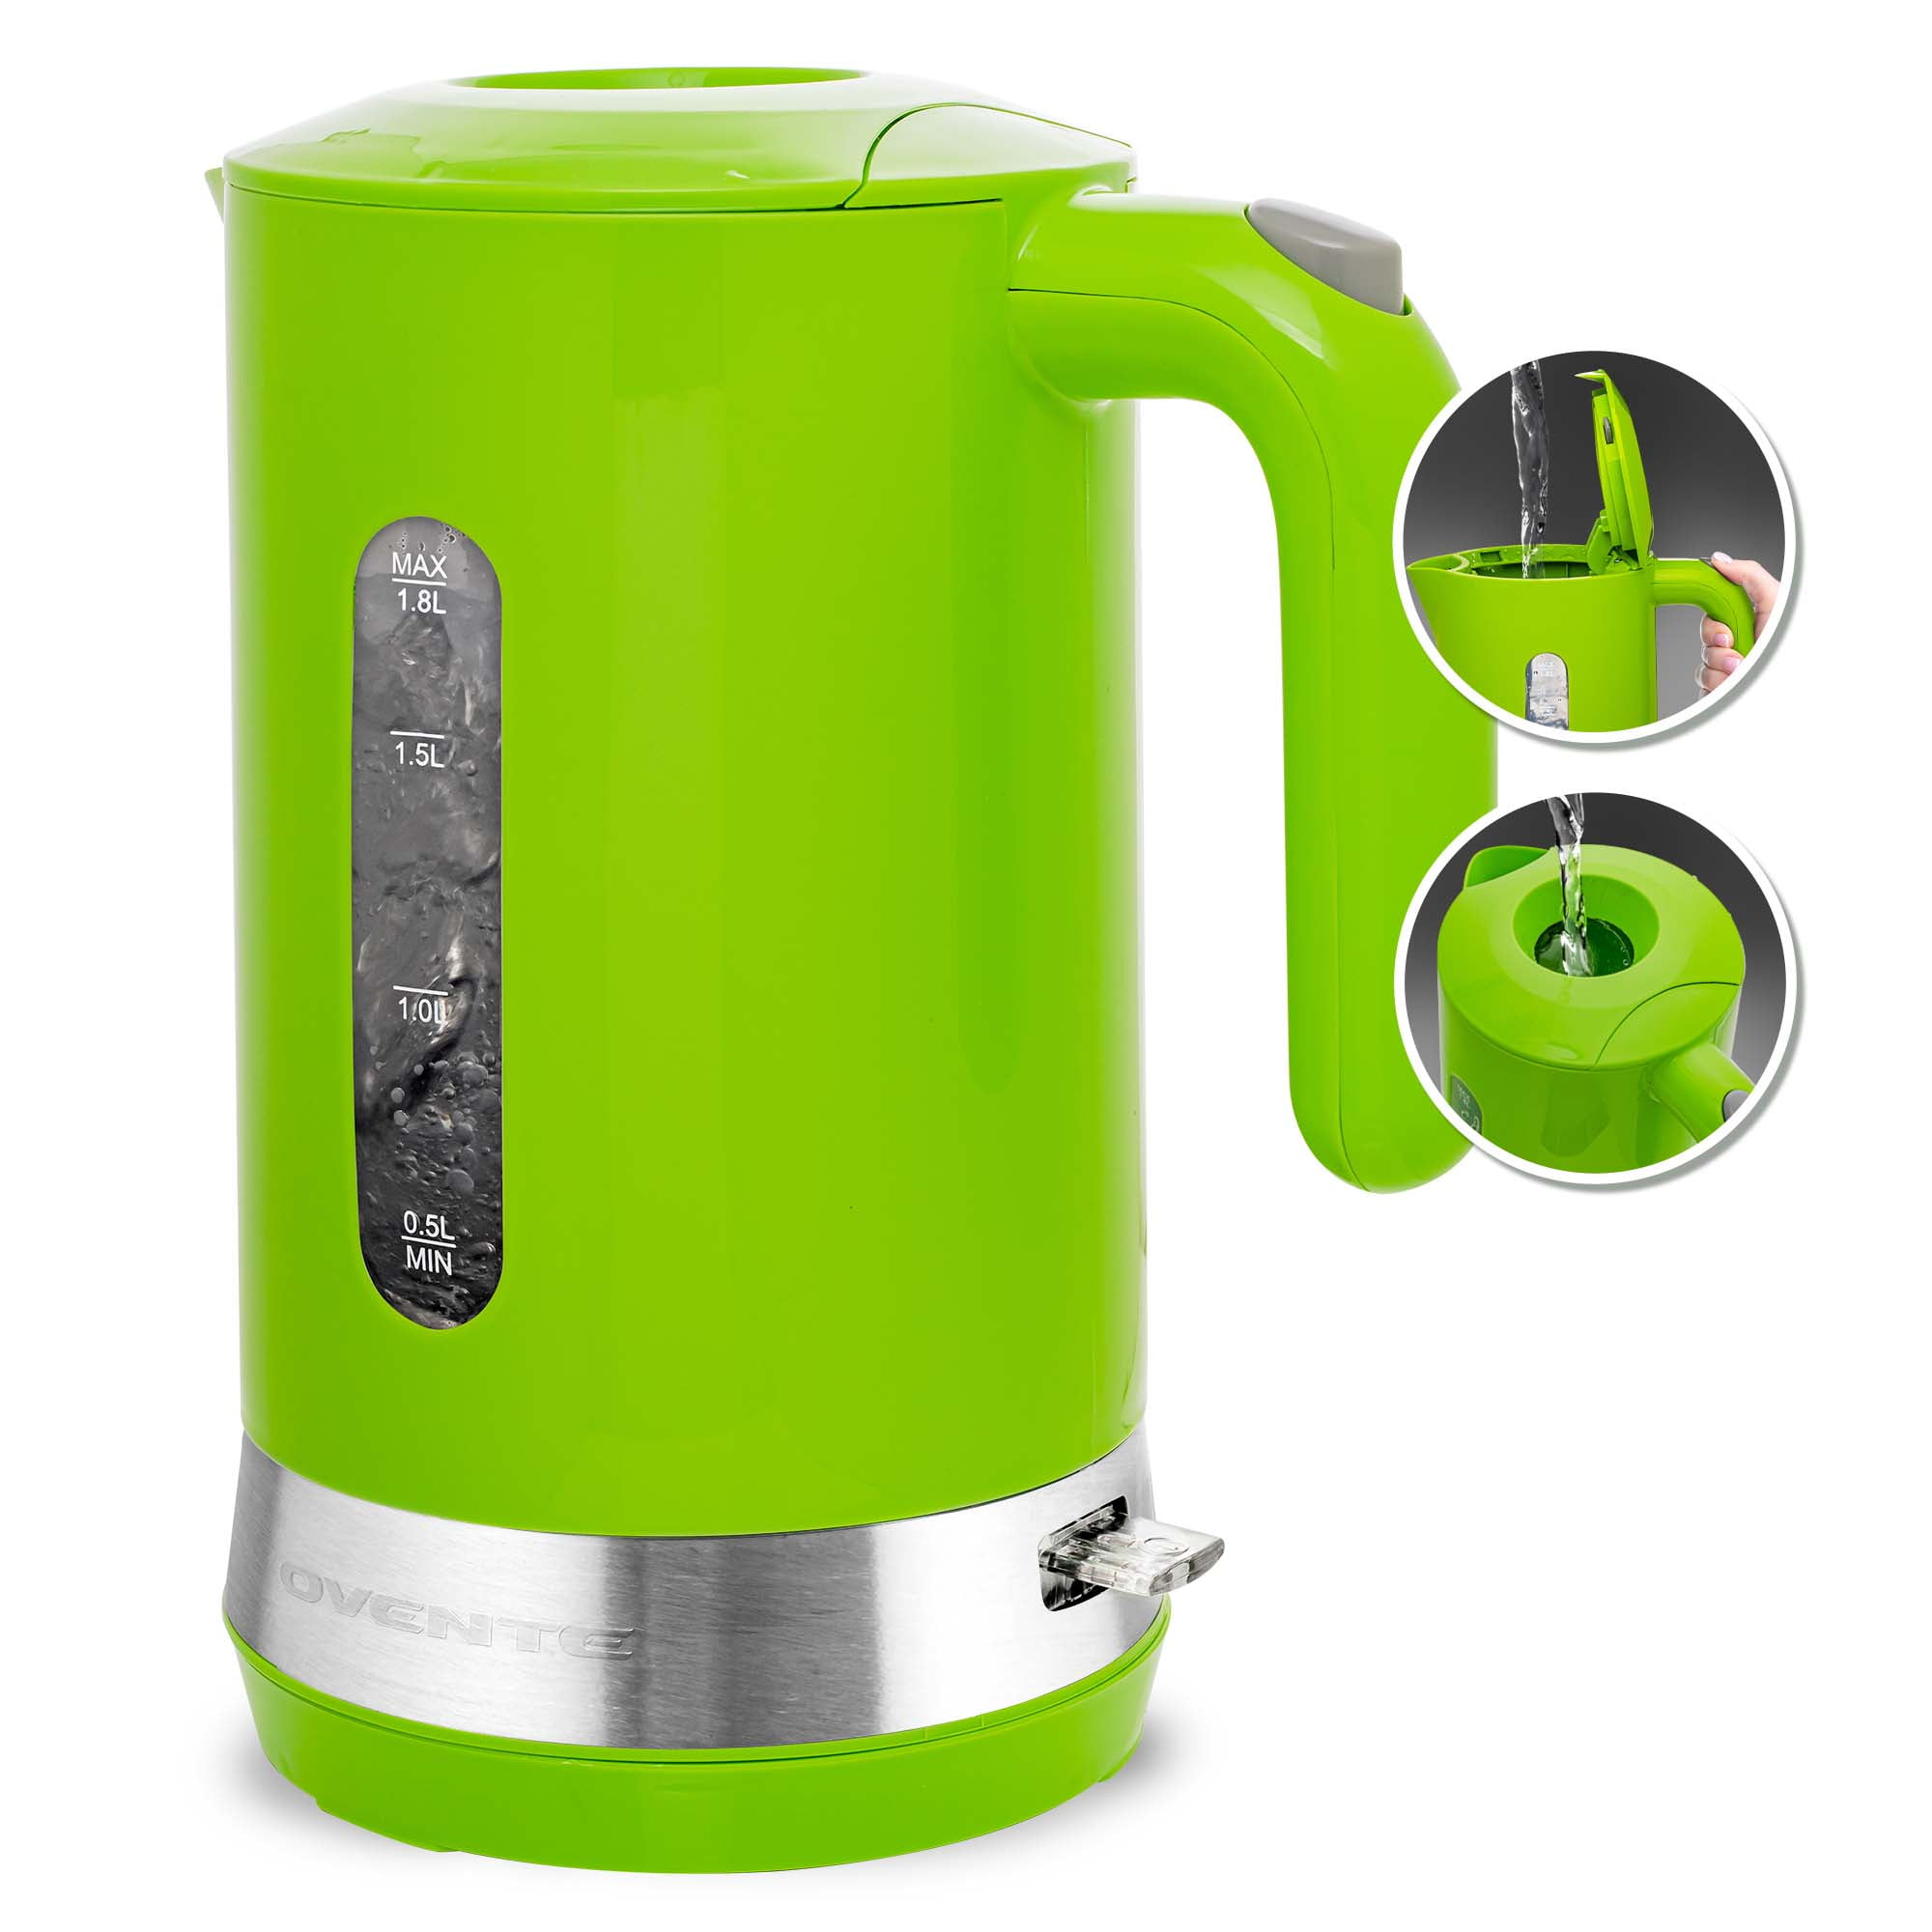 OVENTE Electric Kettle Hot Water Heater 1.8 Liter - BPA Free Fast